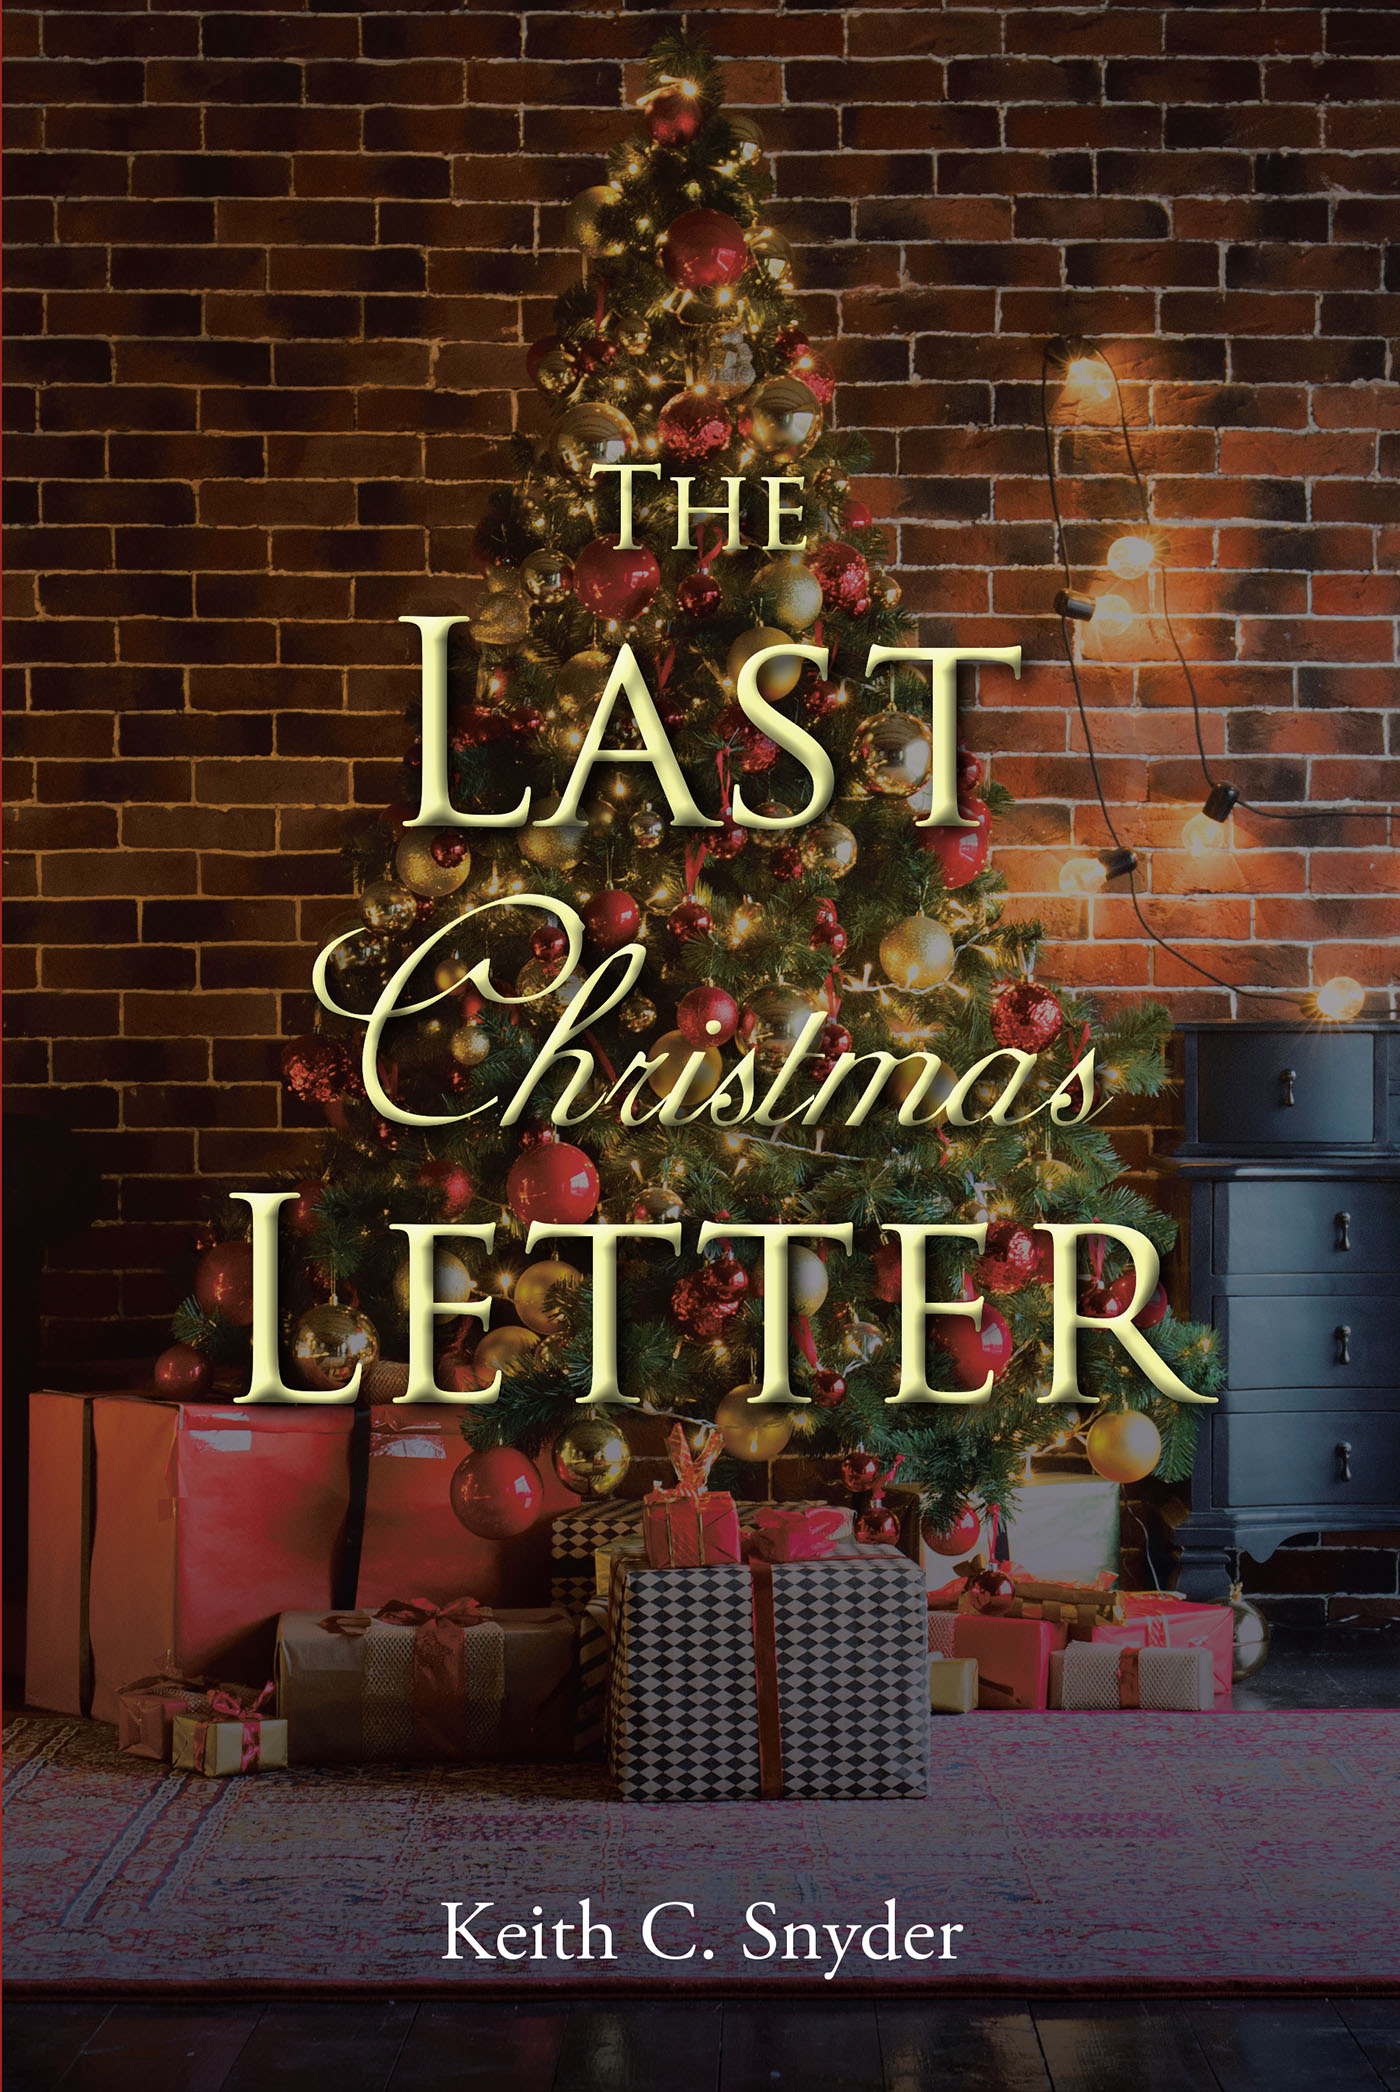 Keith C. Snyder’s Newly Released "The Last Christmas Letter" is an Engaging Look Into a Vibrant and Diverse Family History